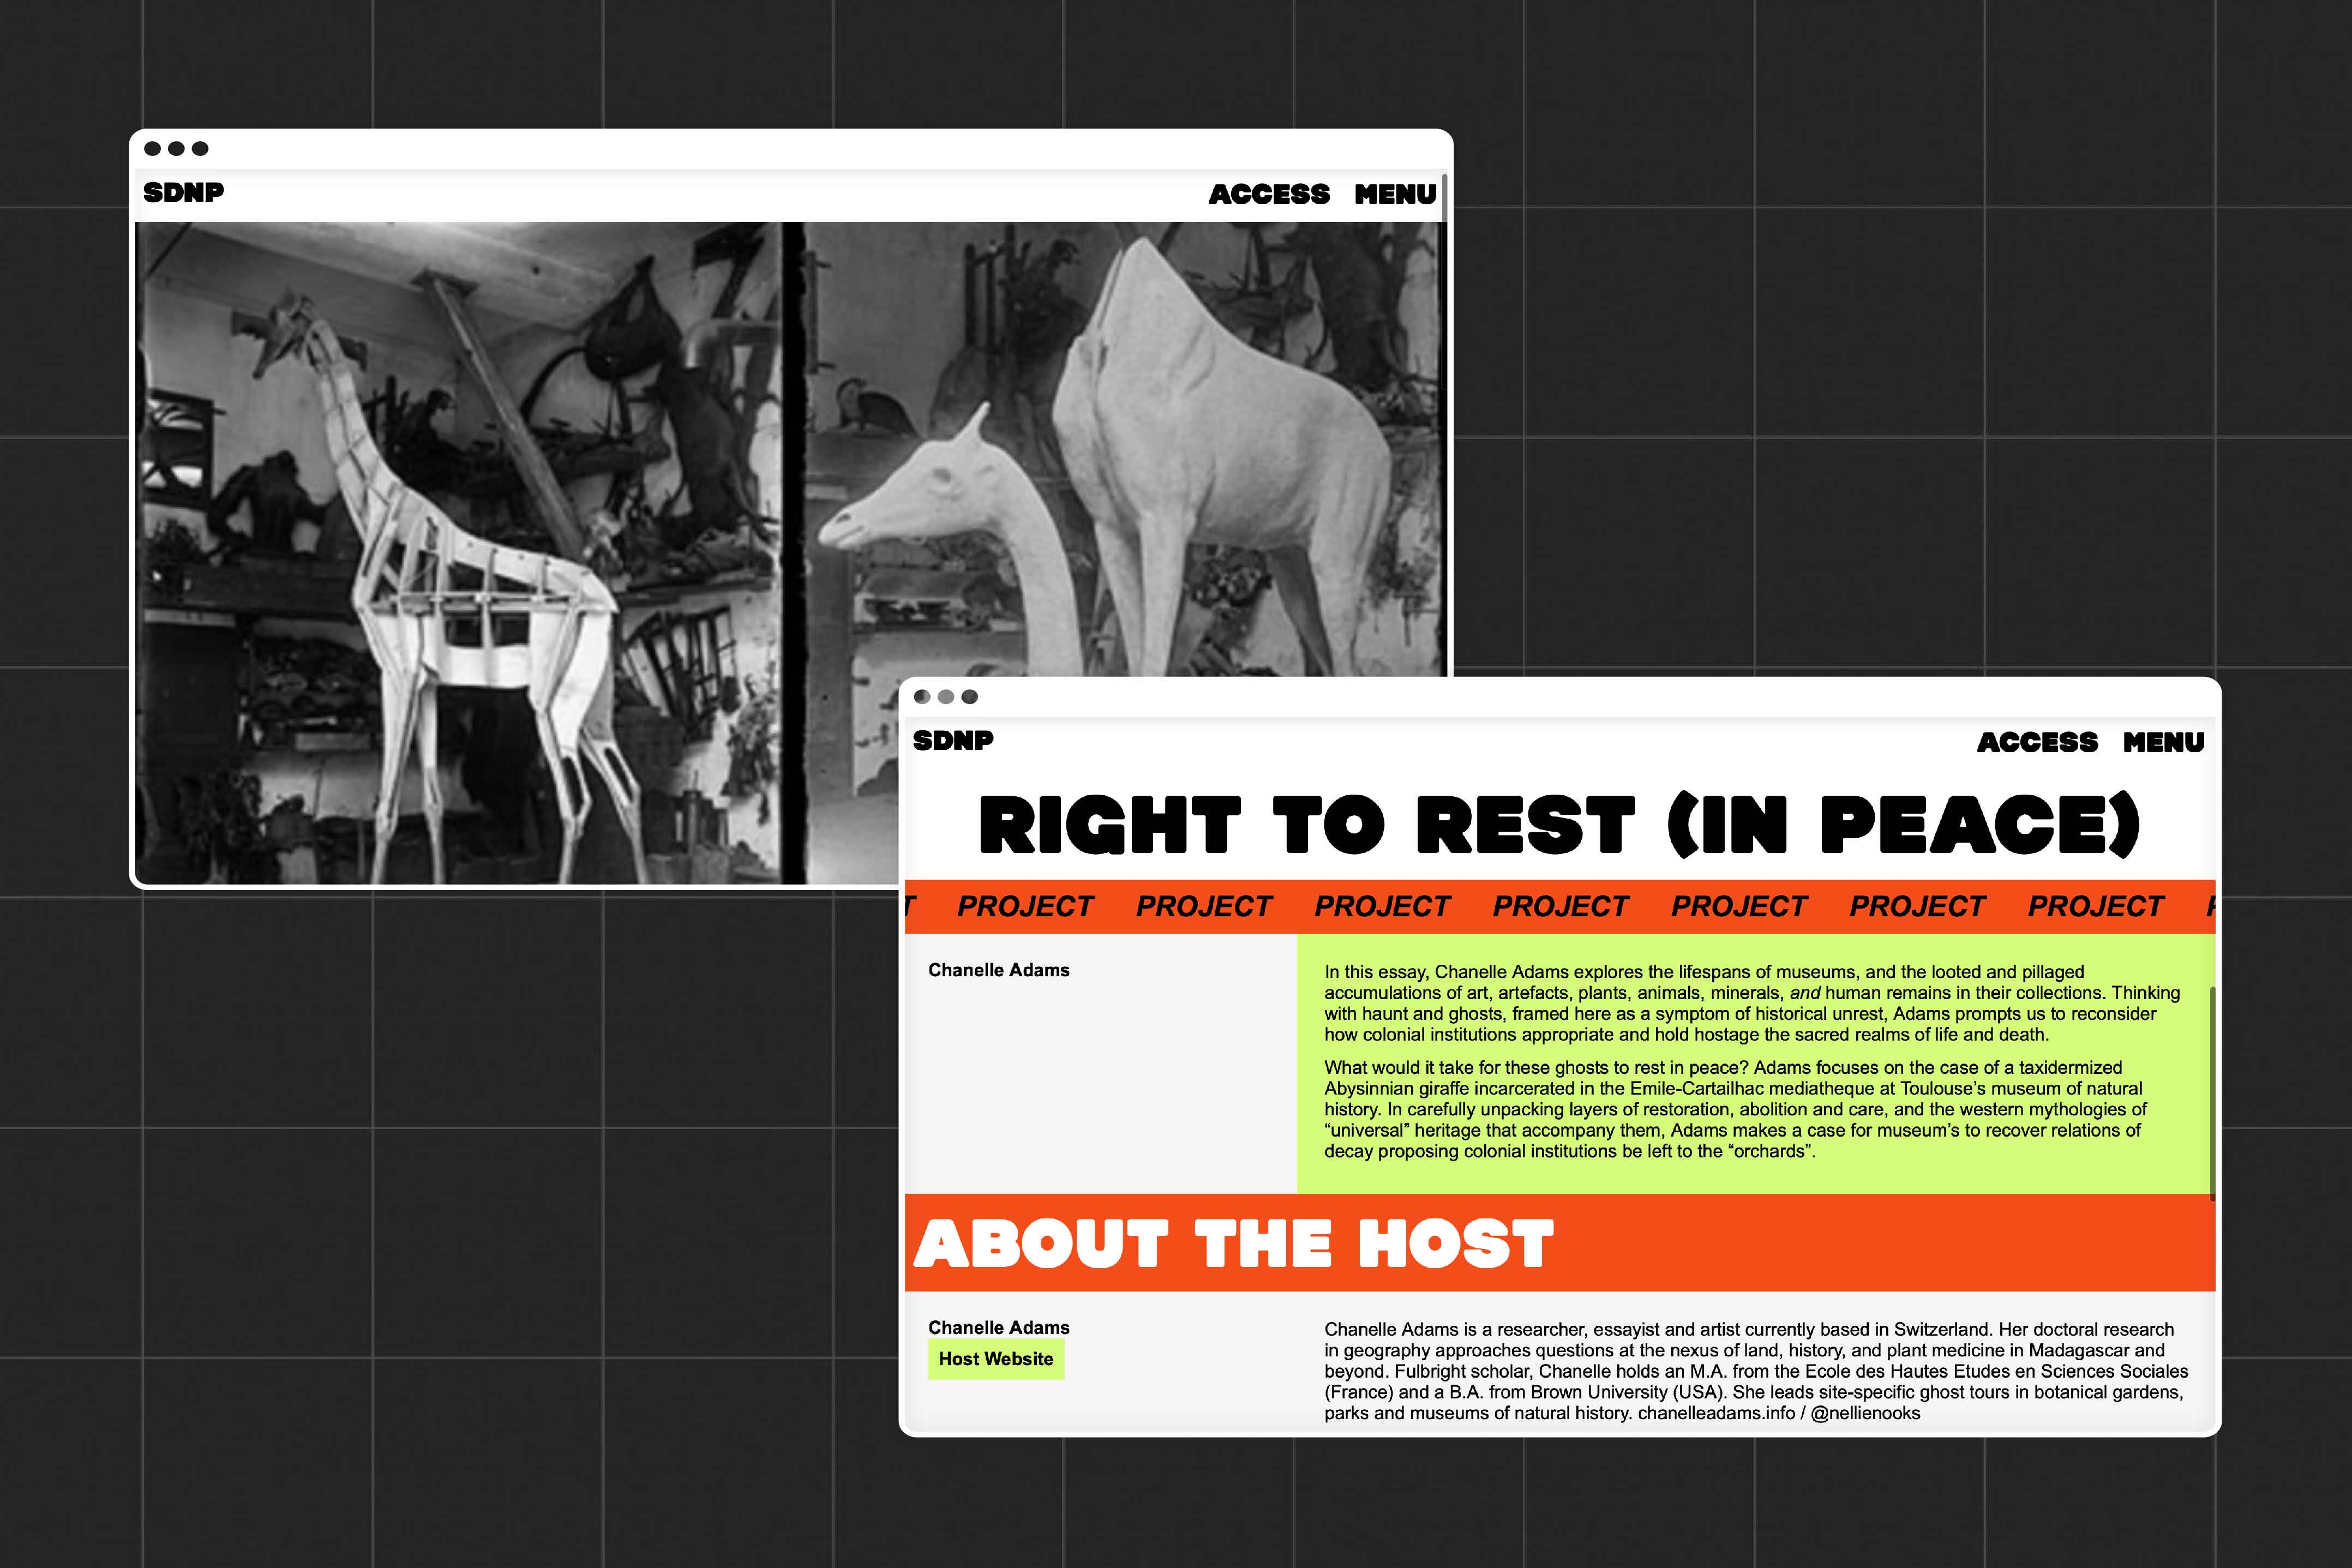 Two further images showing a project which was  part of the SDNP festival, the one on display here uses an image of a taxidermy giraffe, and is entitled 'Right to Rest (in Peace)'. The second image on display shows information about the project and the project host